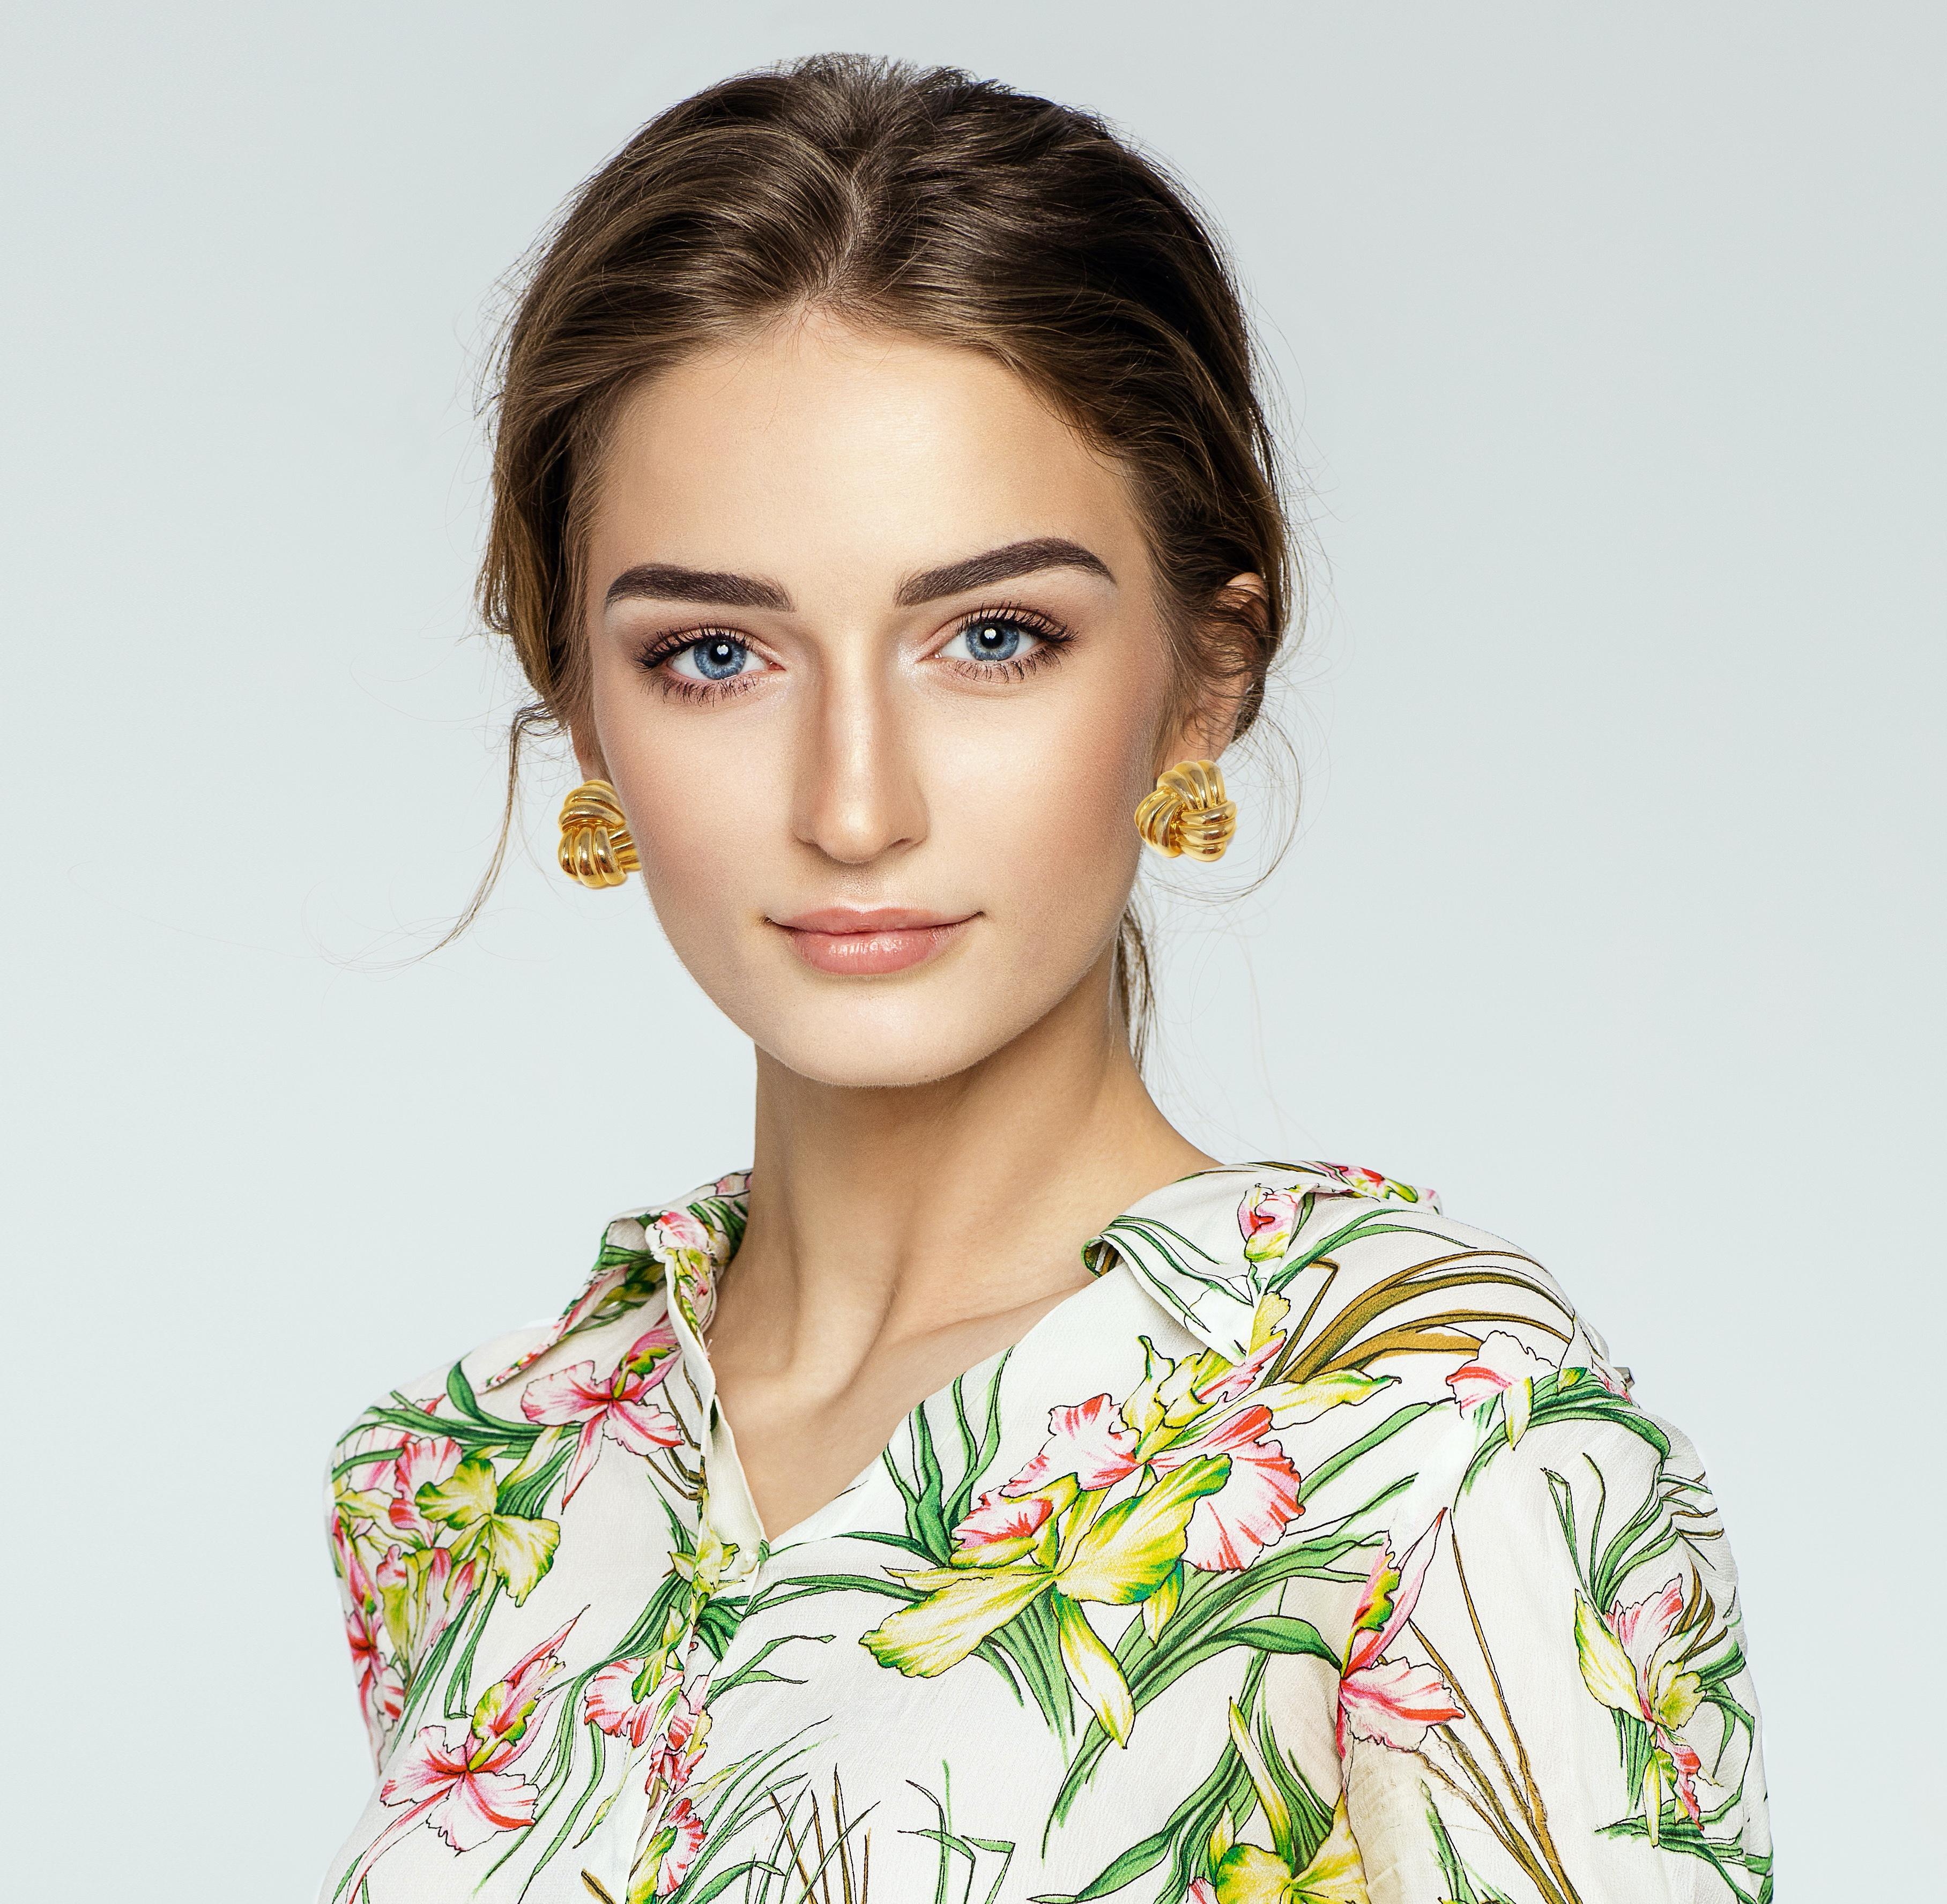 These gorgeous vintage Napier gold-plated knot stud earrings are a timeless accessory from the coveted costume jewelry brand. A wonderful addition to your vintage jewelry collection!

ABOUT NAPIER:
Founded in 1875, Napier is an American manufacturer